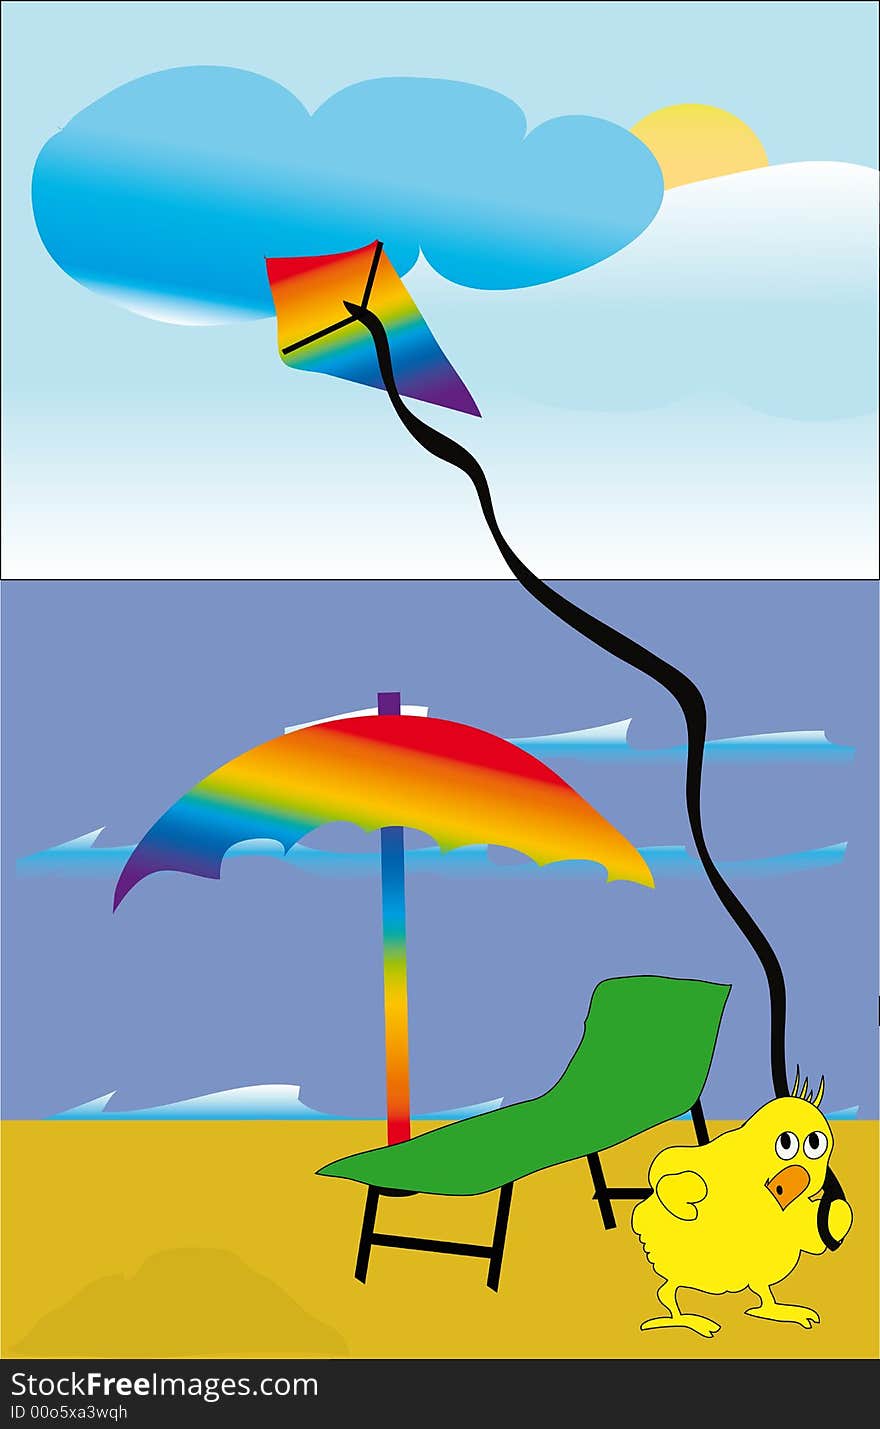 Duck on the beach with a parasol